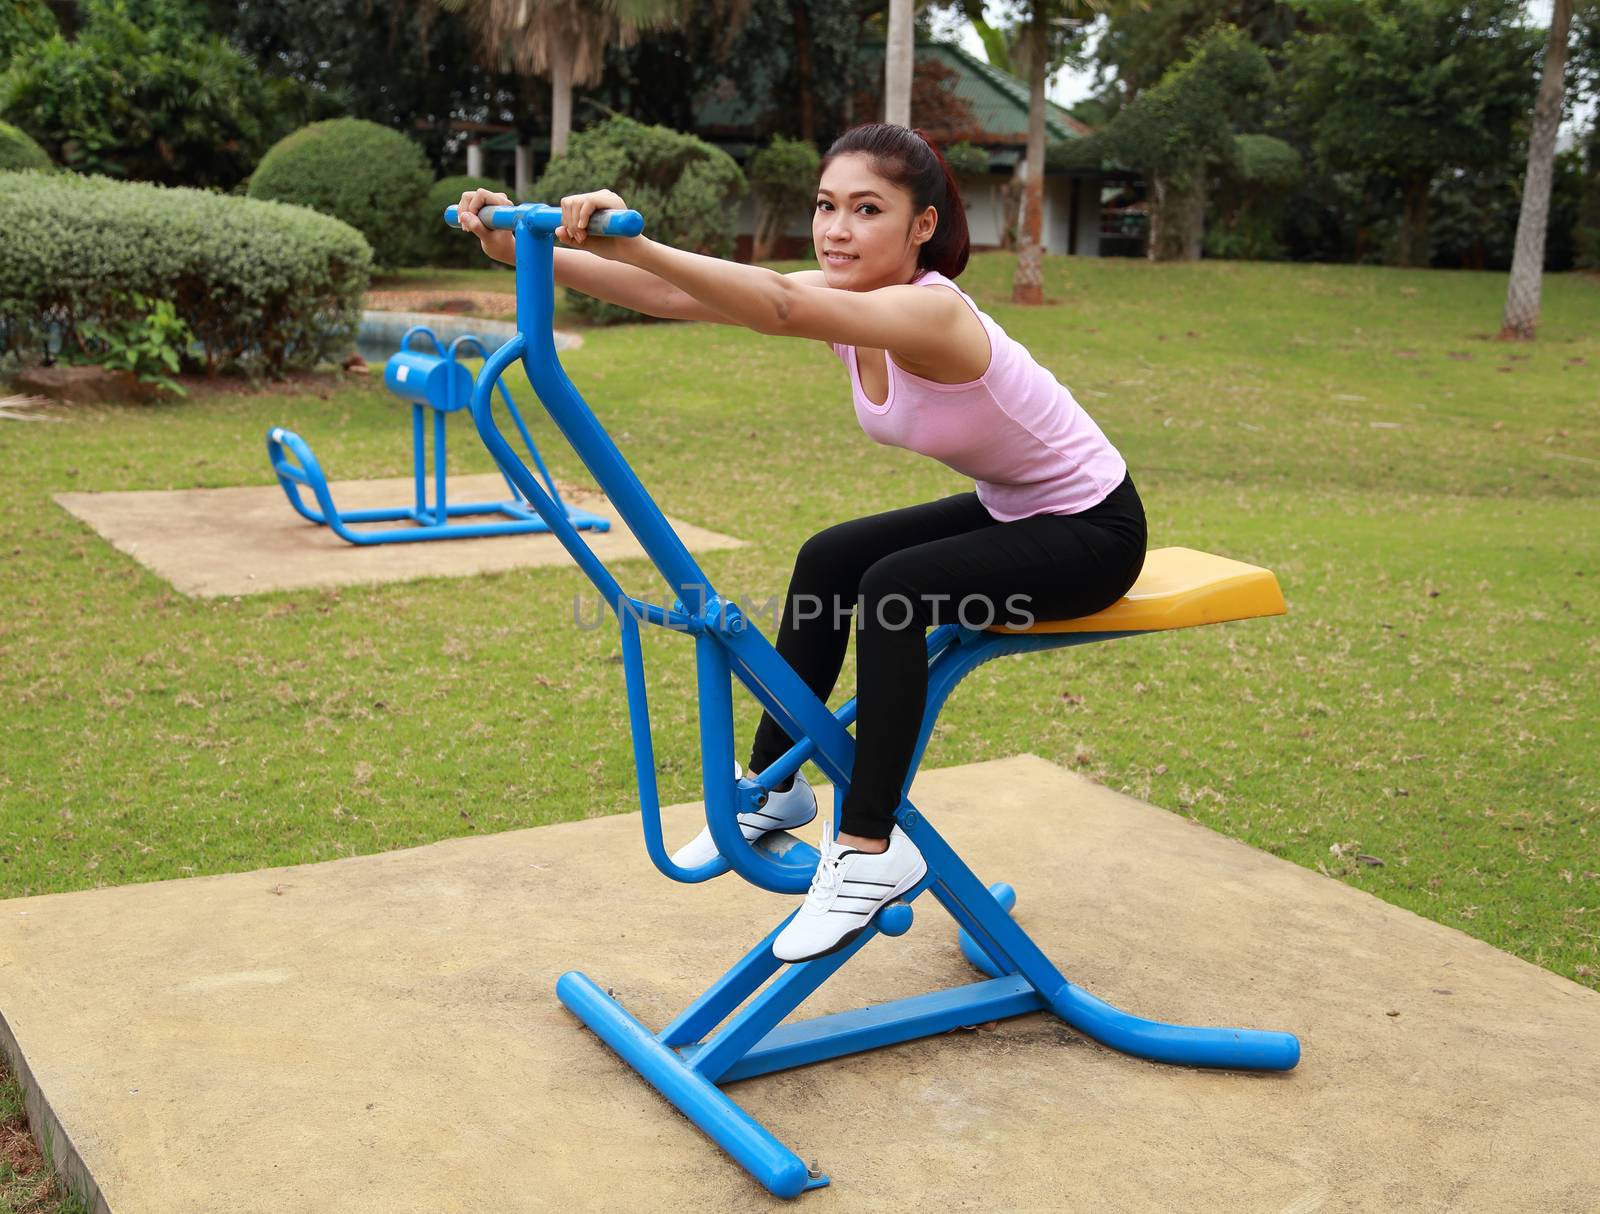 woman exercising with exercise equipment in the park by geargodz